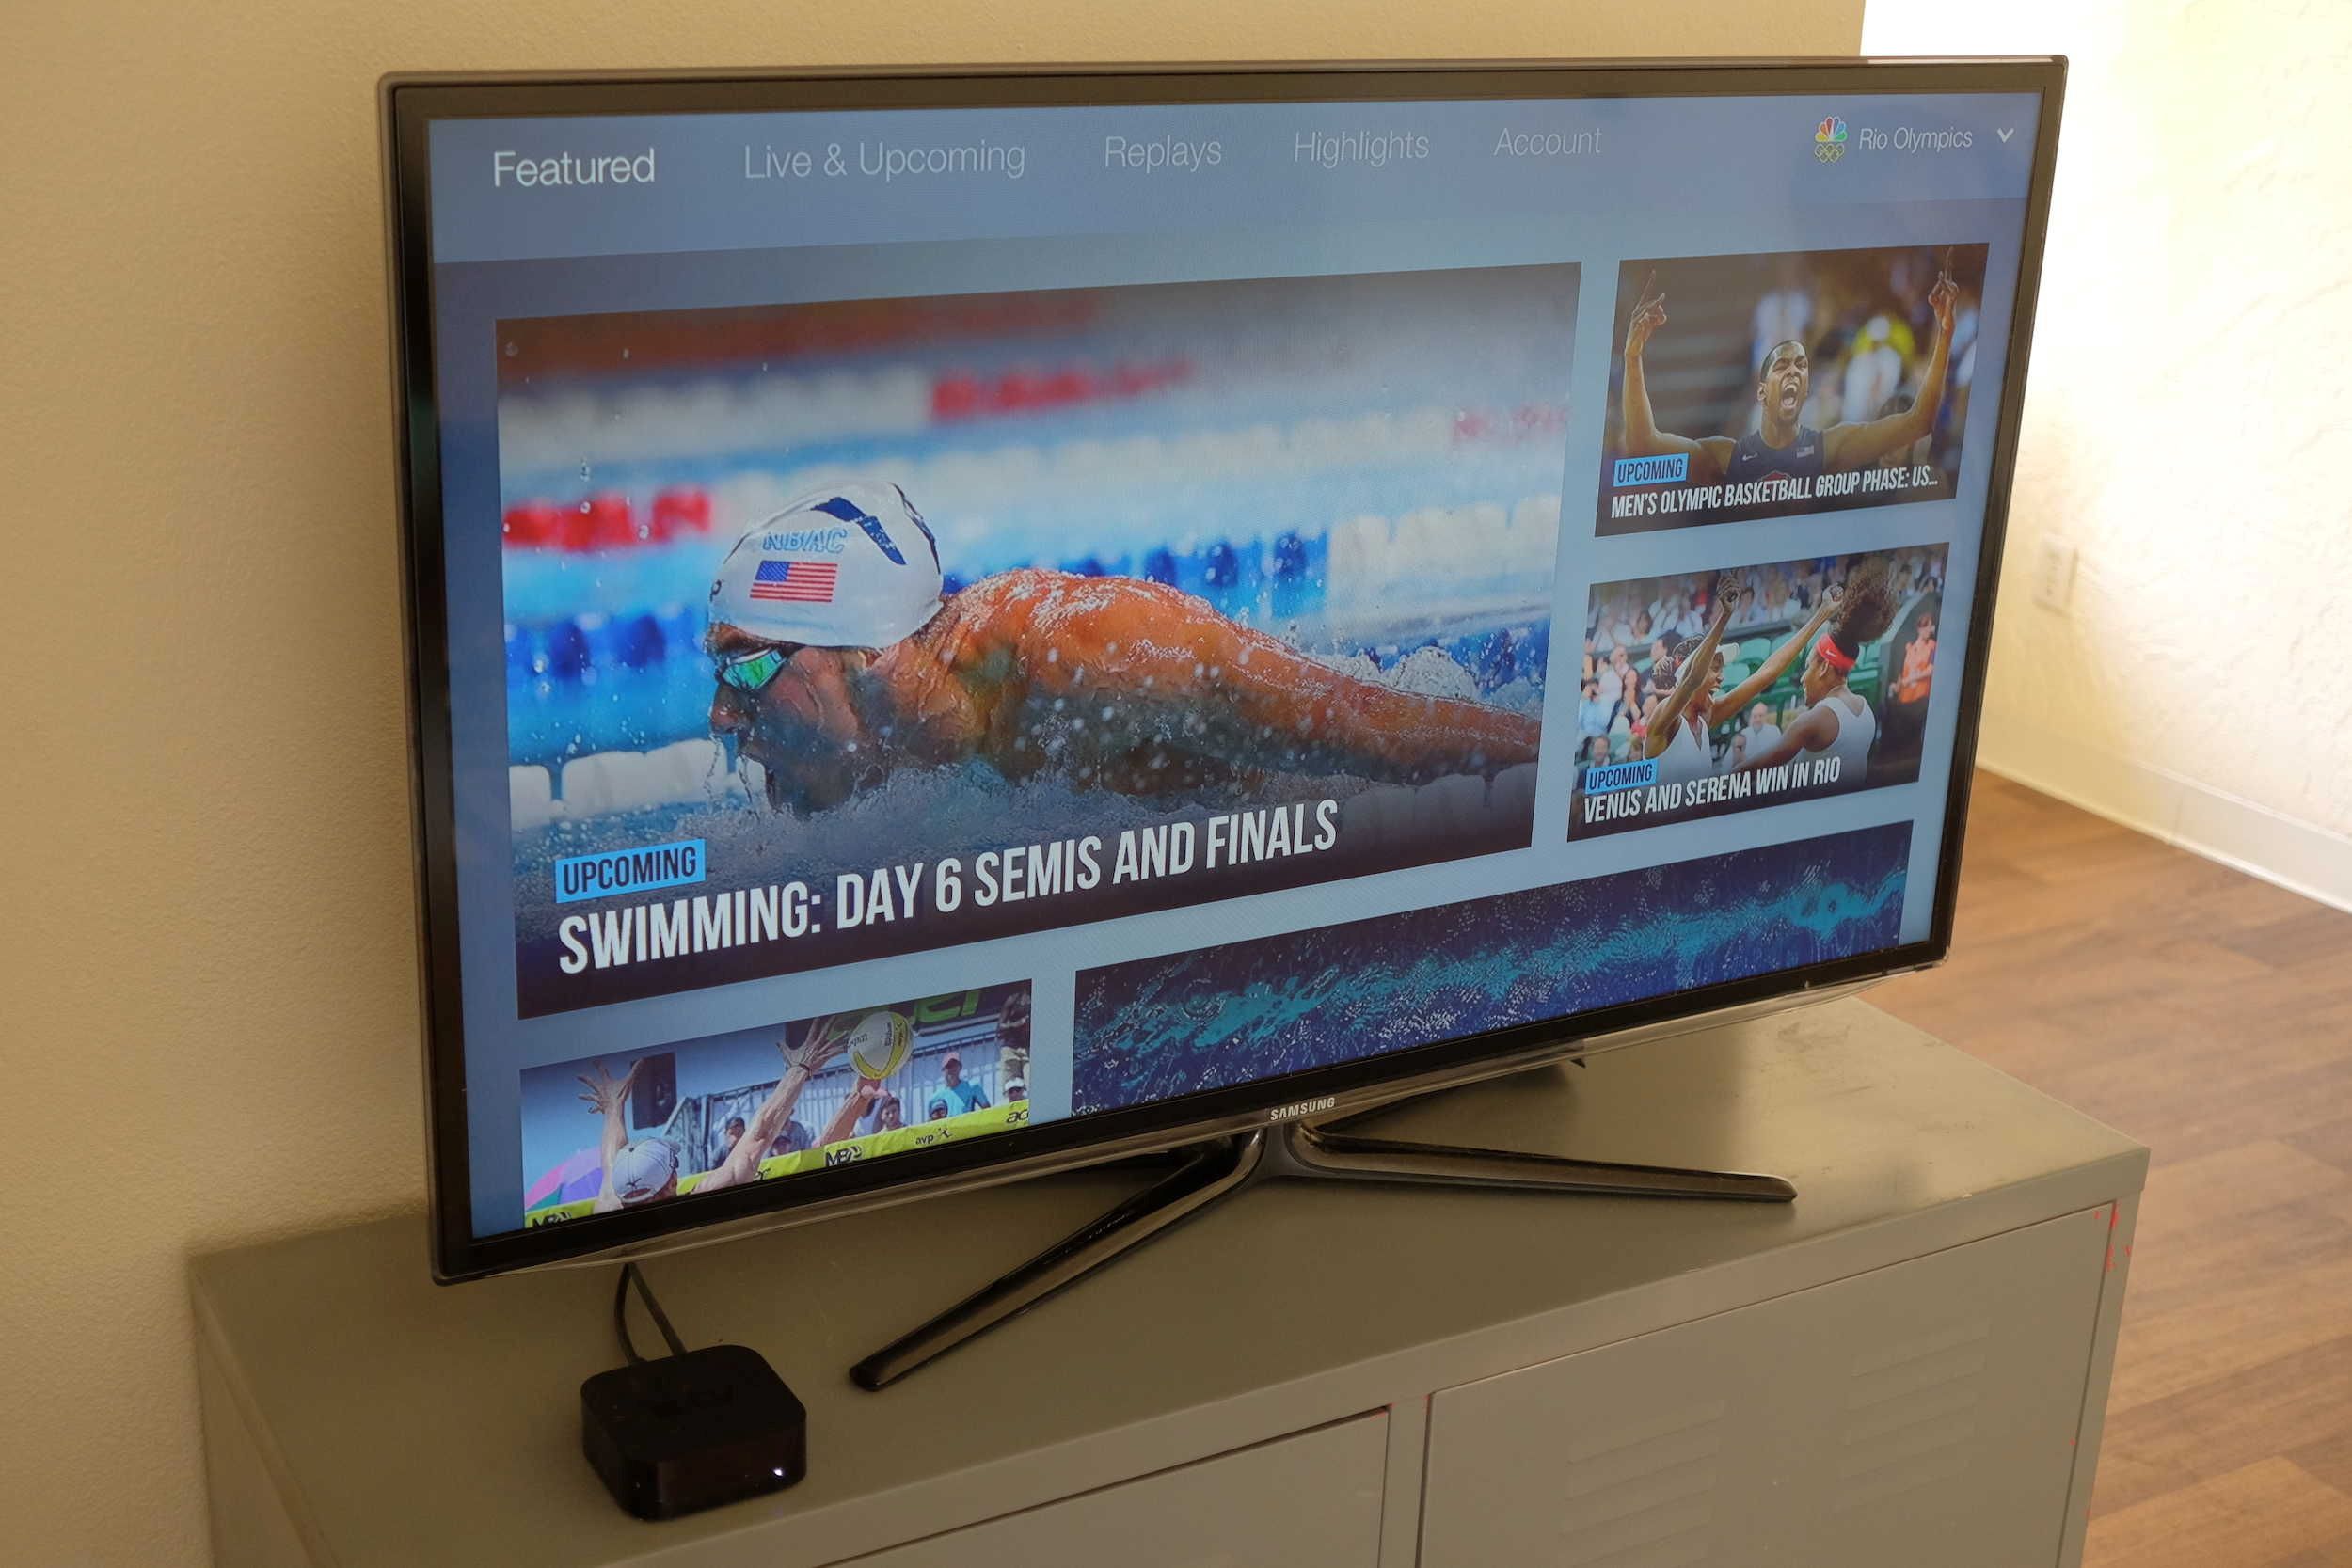 How To Watch The Olympics On Apple TV